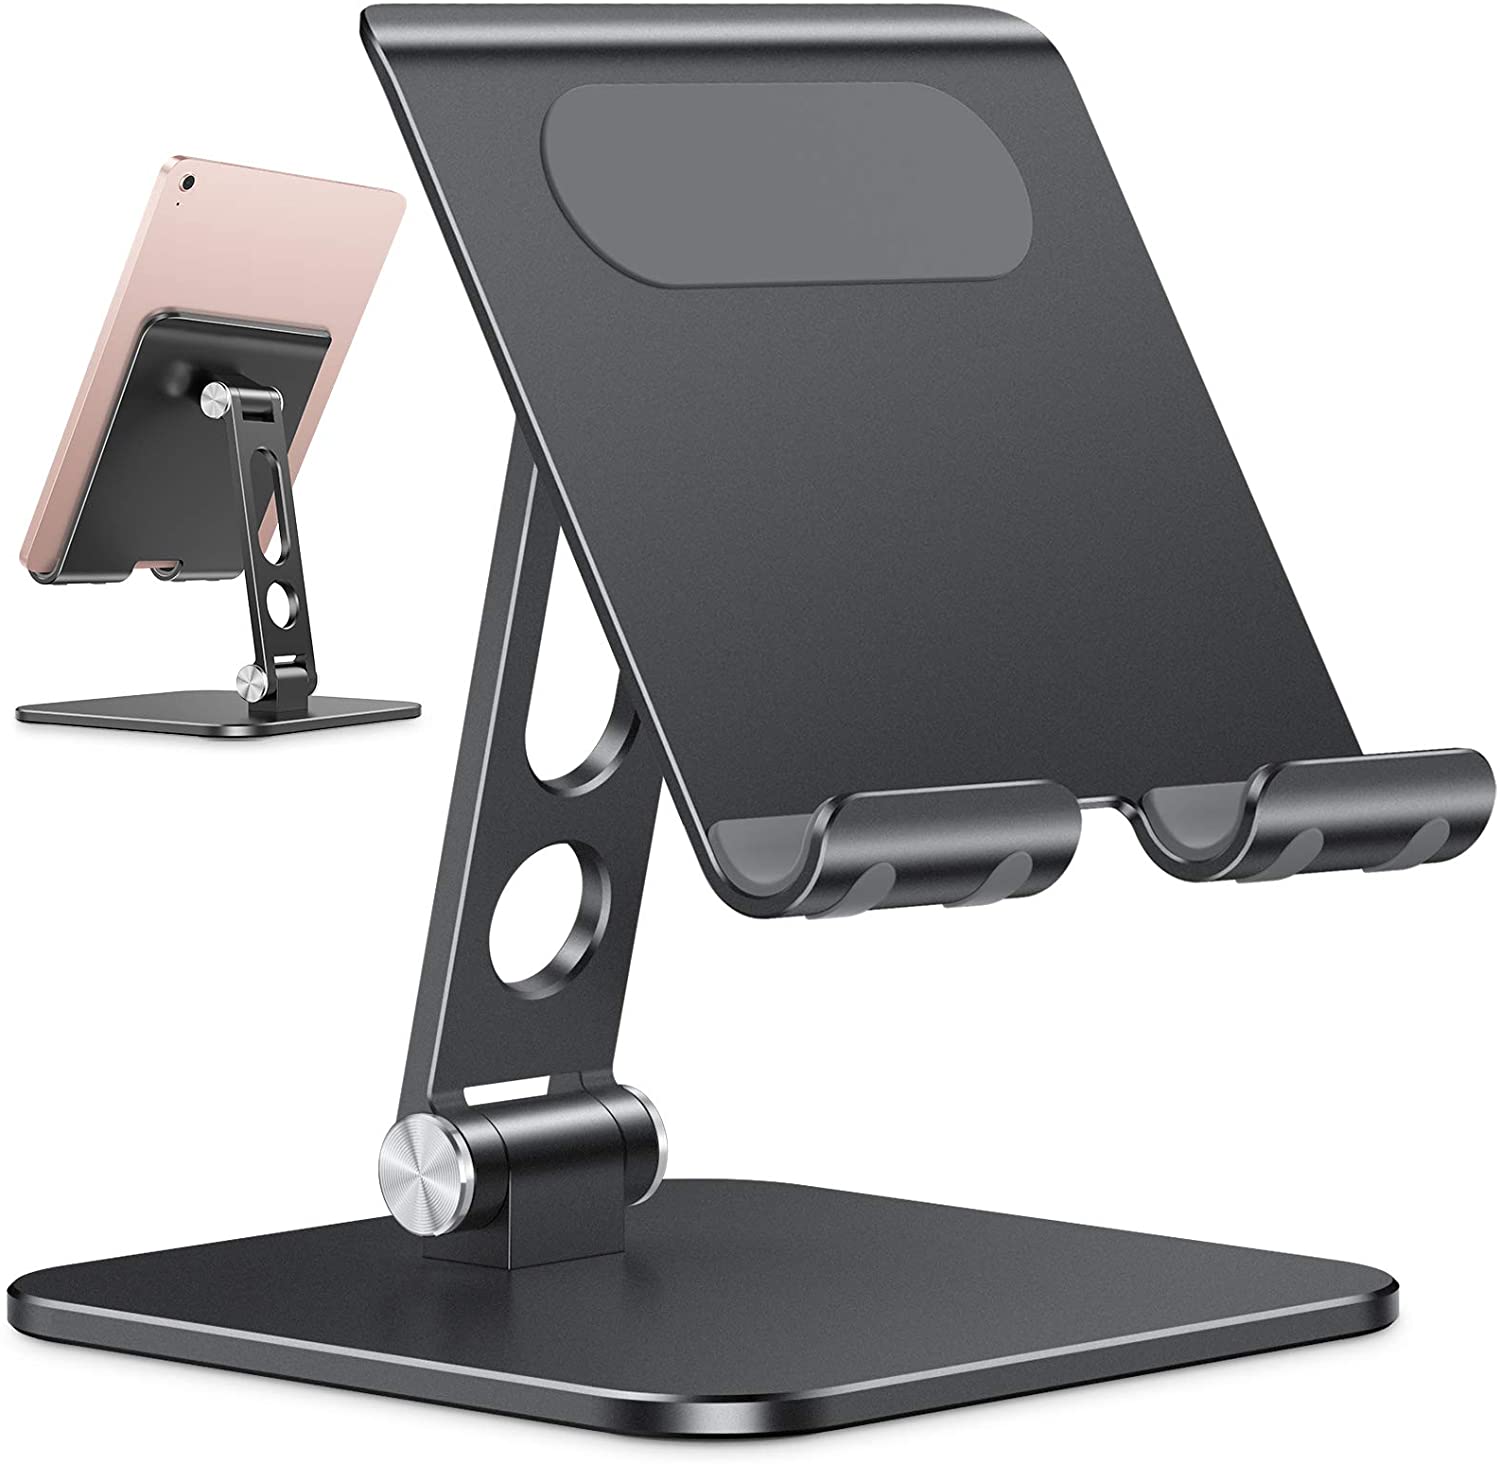 OMOTON Adjustable Tablet Stand Compatible with iPad and All Cell Phones Tablets Gold Stable Sticky Base Up to 12.9 inch 